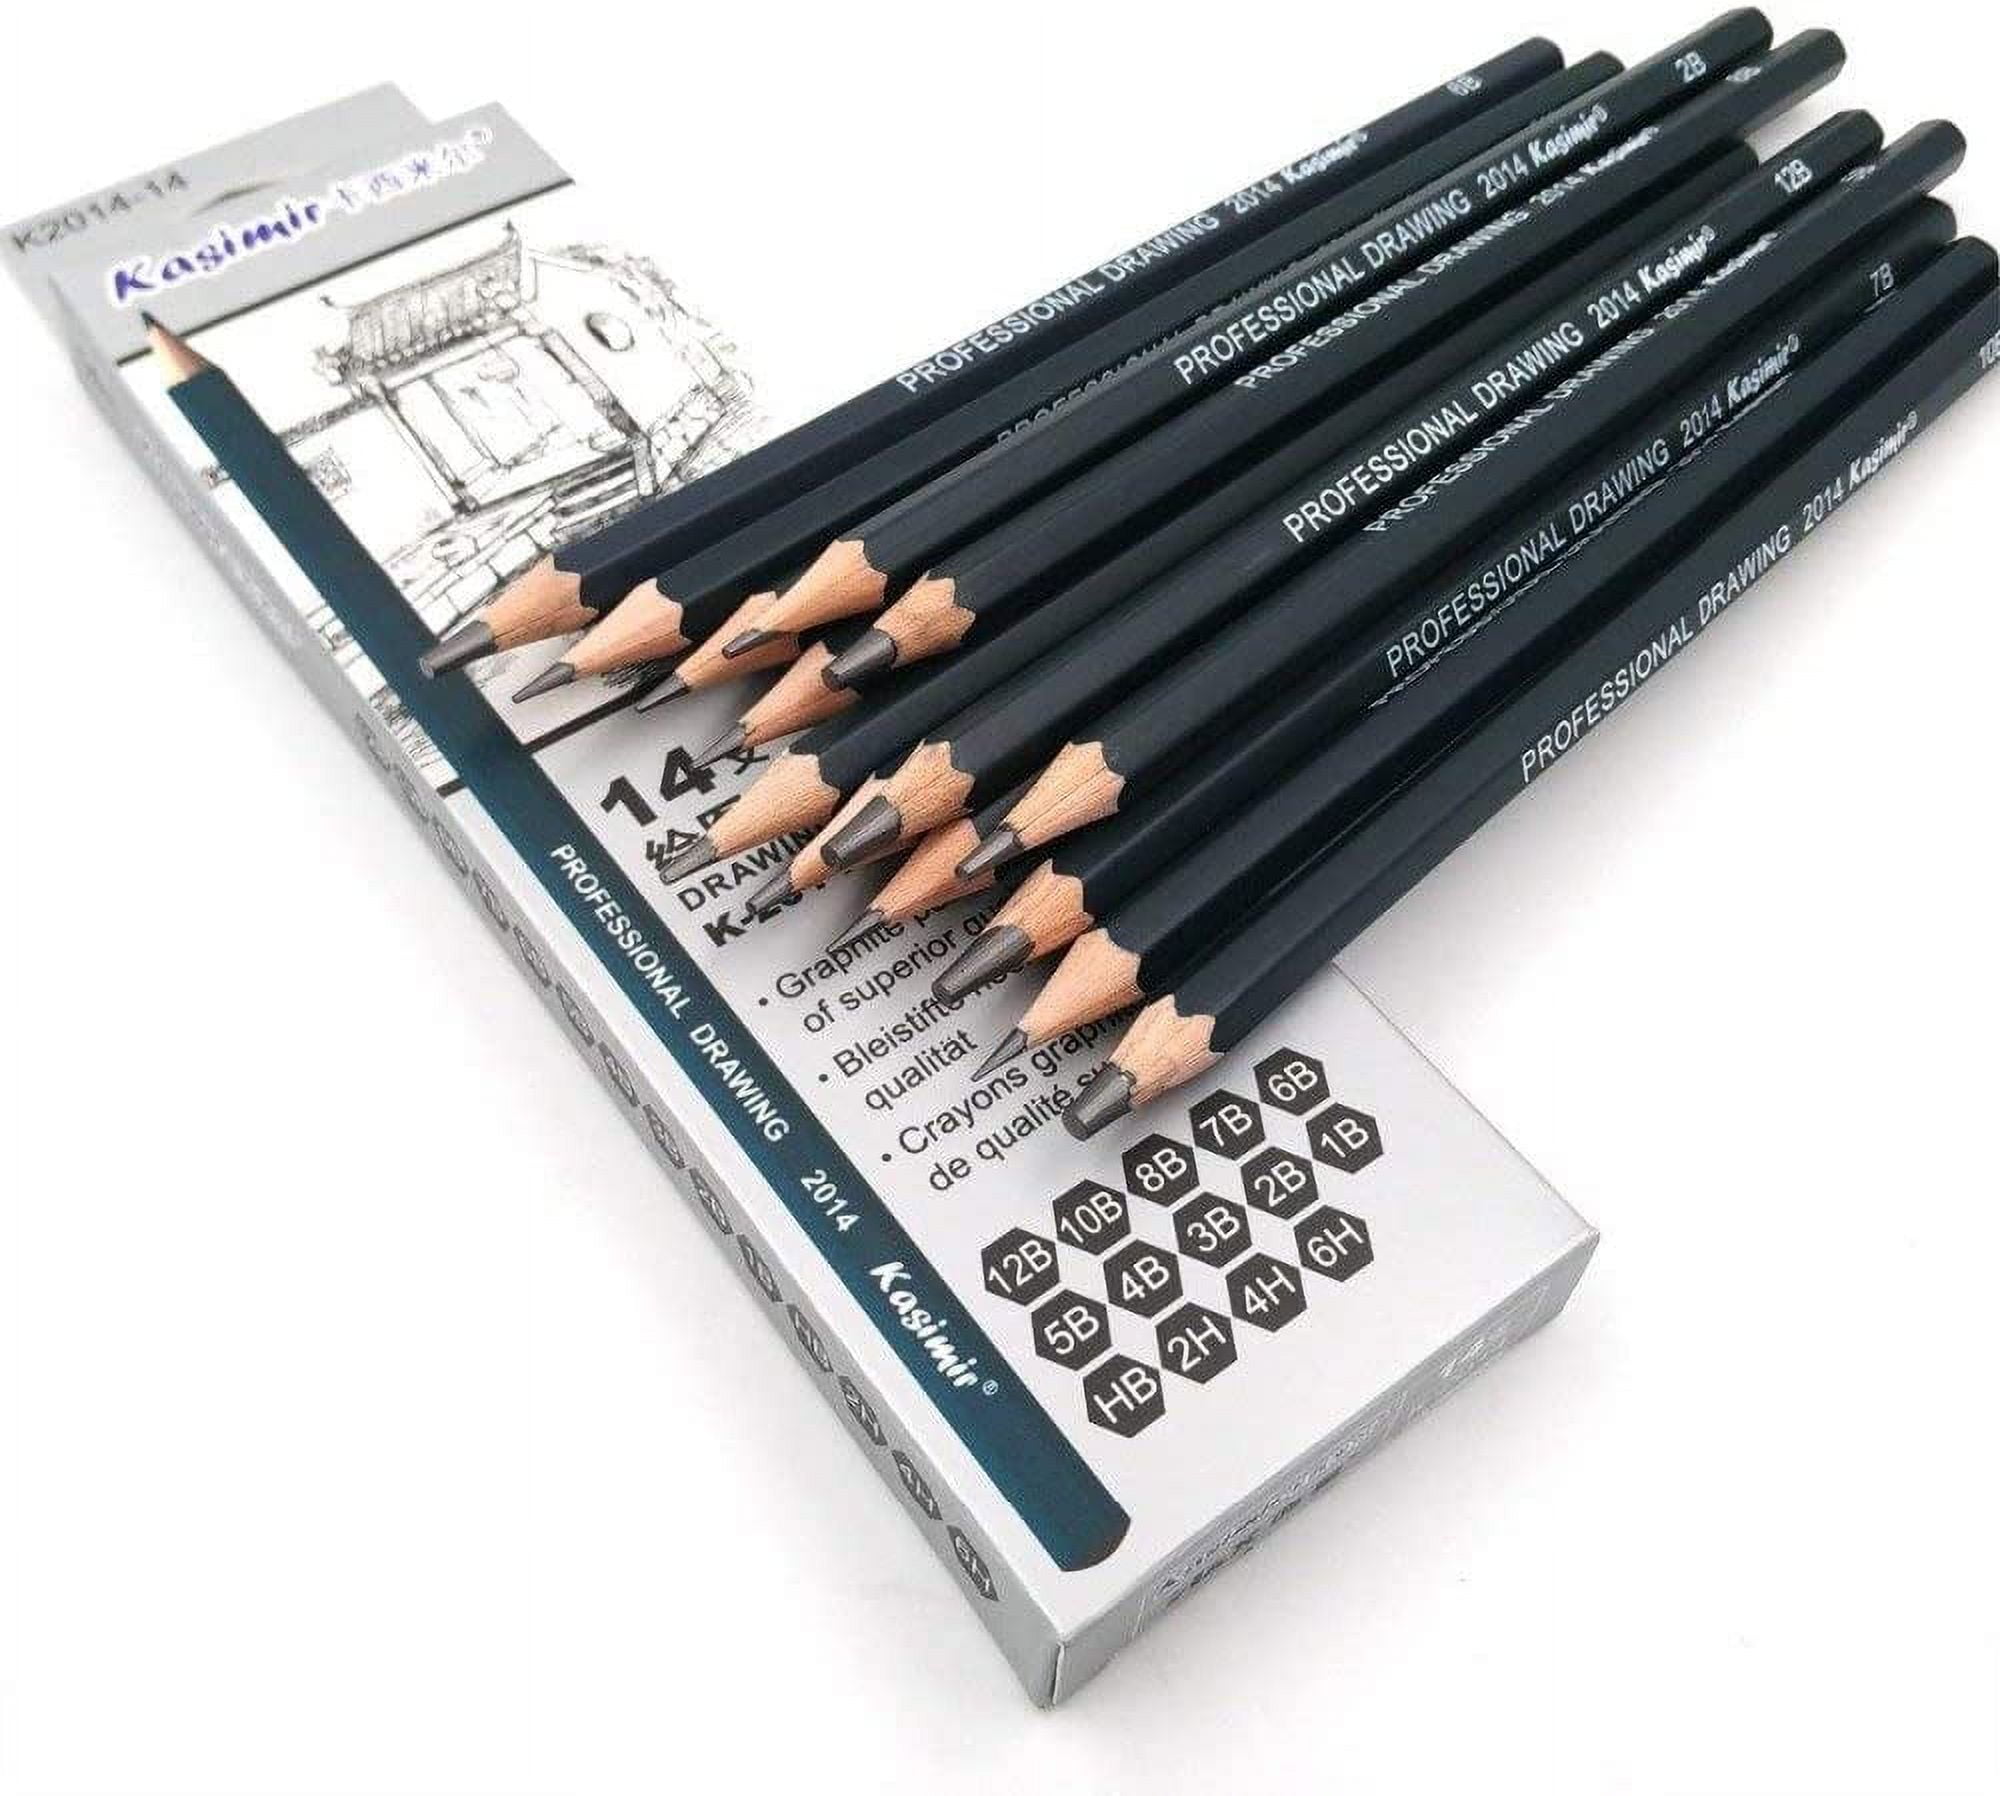 Brusarth Professional Charcoal Pencils Drawing Set 6 Pieces (Ex-Soft, Soft,  Medium, & Hard) Charcoal Pencils for Drawing, Sketching, Shading, Artist  Pencils for Beginners & Artists - Yahoo Shopping